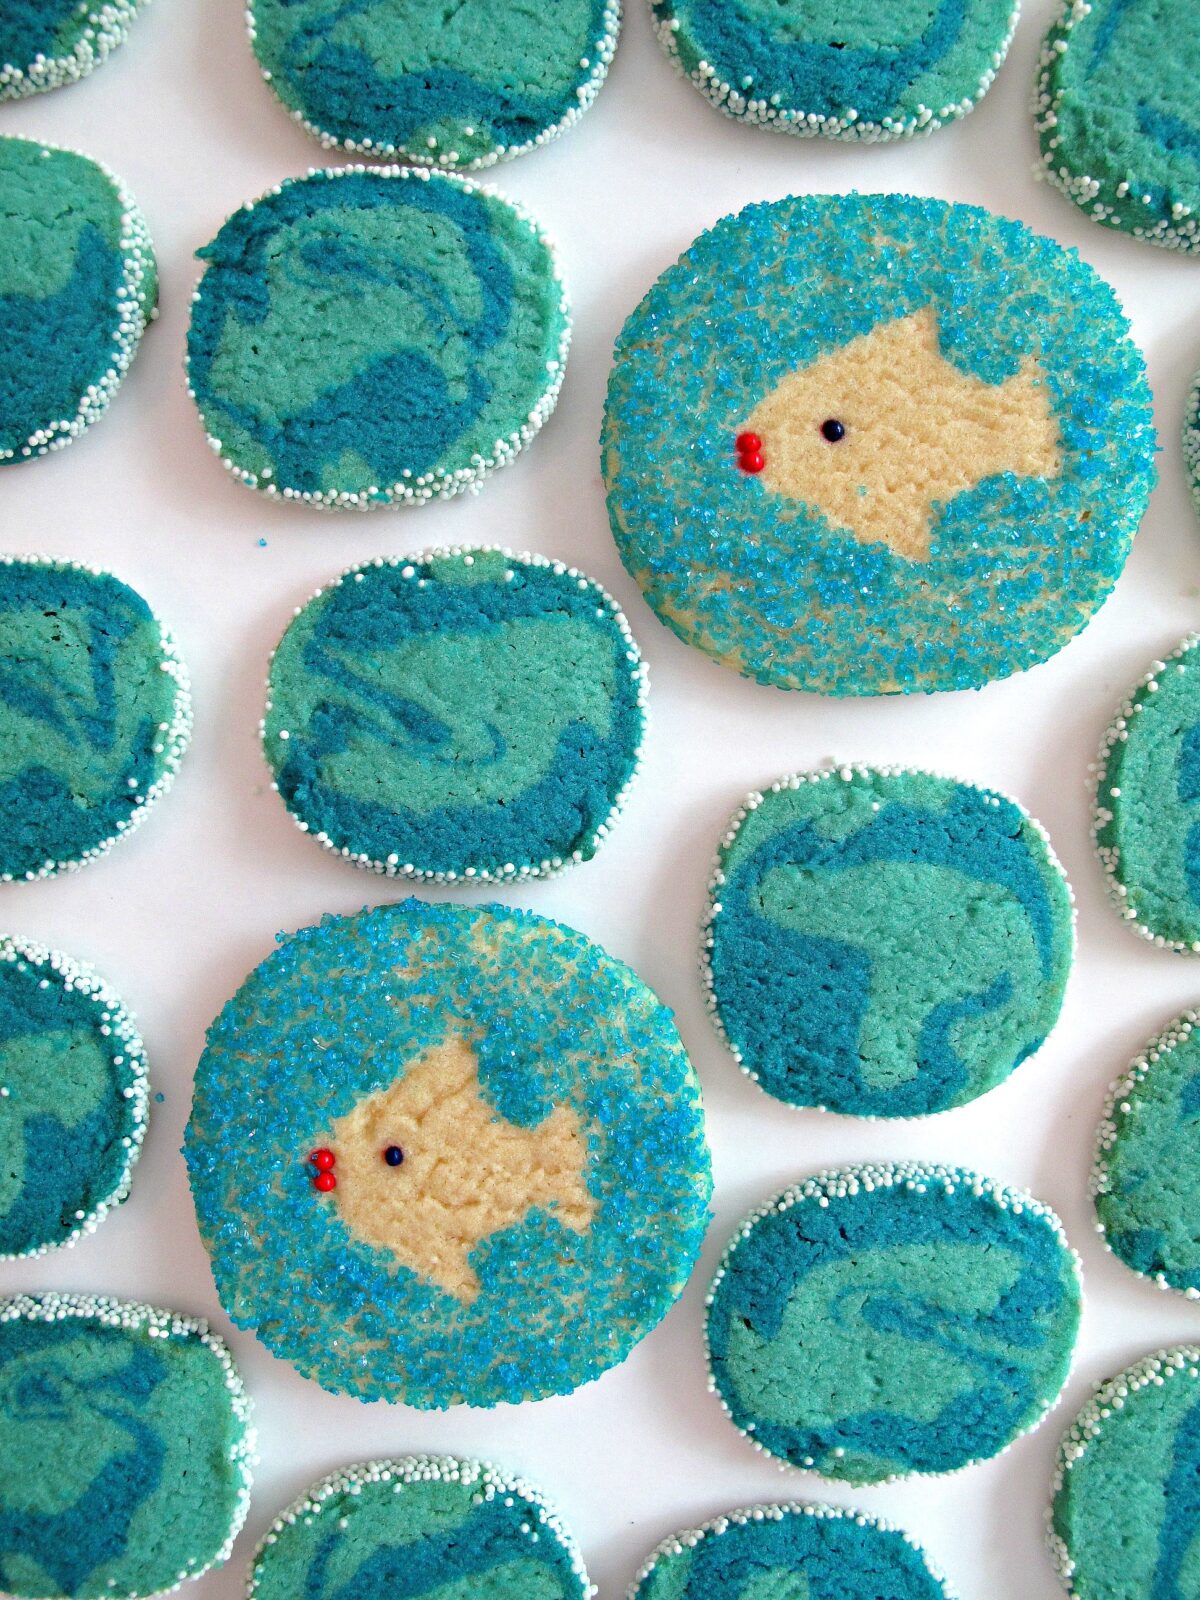 Blue sugar cookies with a fish shape stenciled in the center.